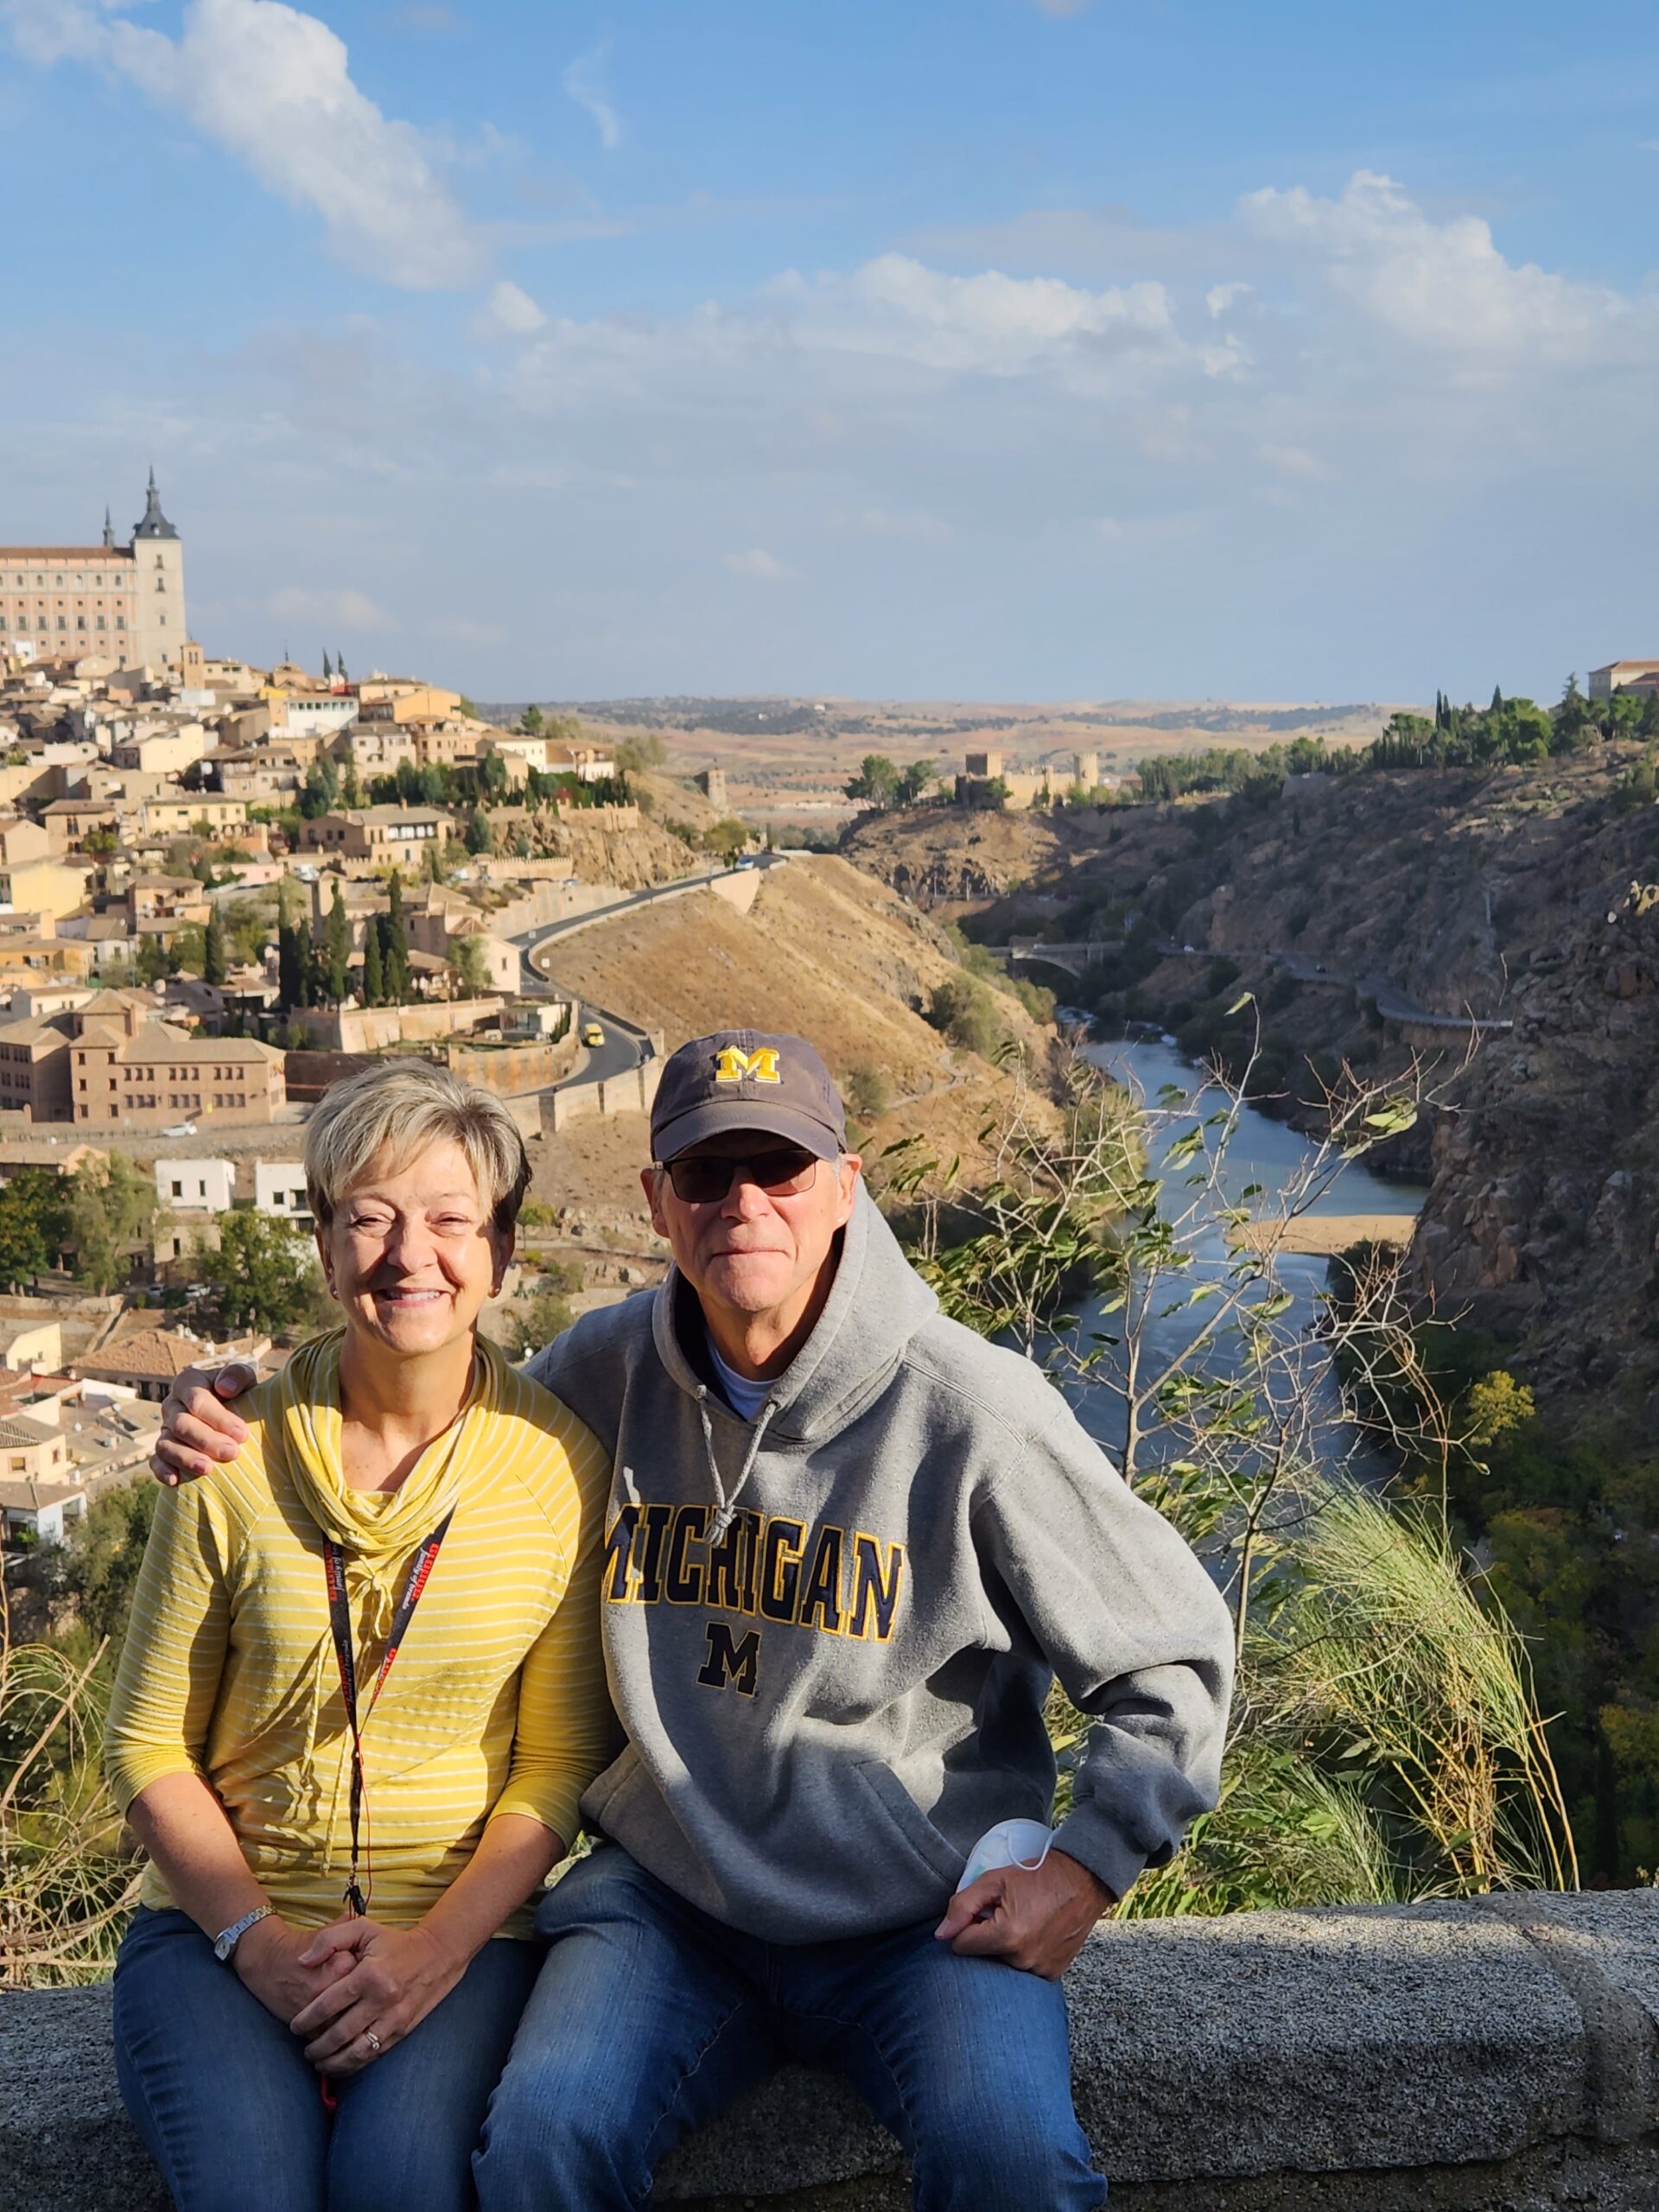 On game day, Nov. 12, 2022, David, ’66, MBA’67, and Jean Yohe were proud to wear the colors as they visited Toledo, Spain.